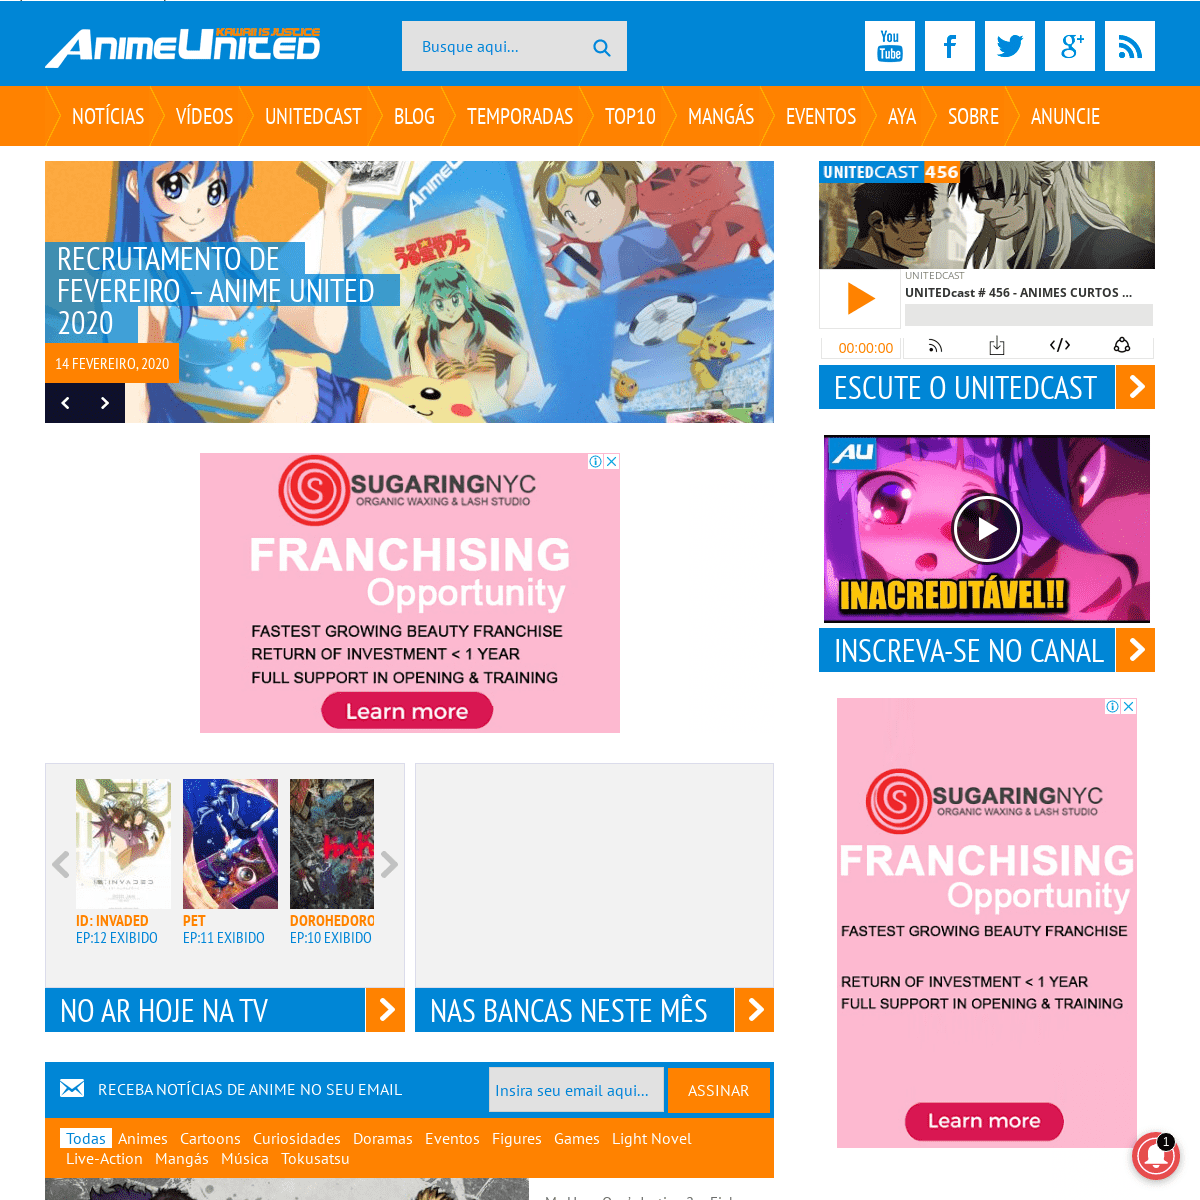 A complete backup of animeunited.com.br